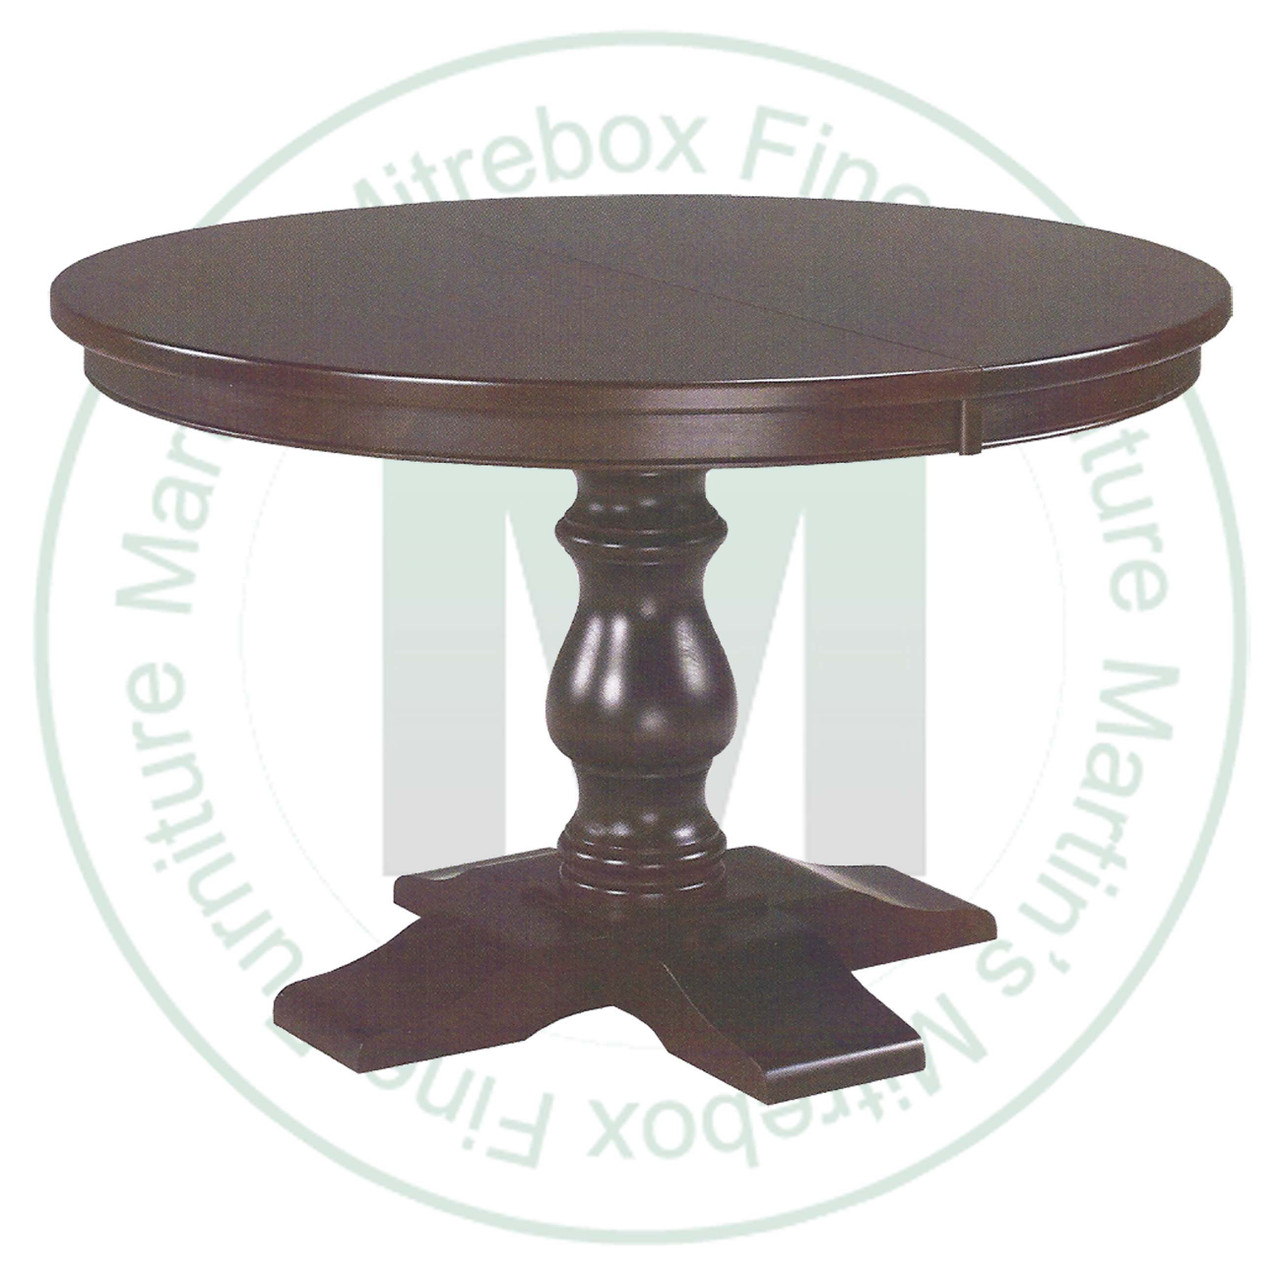 Wormy Maple Savannah Single Pedestal Table 60''D x 60''W x 30''H Round Solid Table. Table Has 1'' Thick Top.